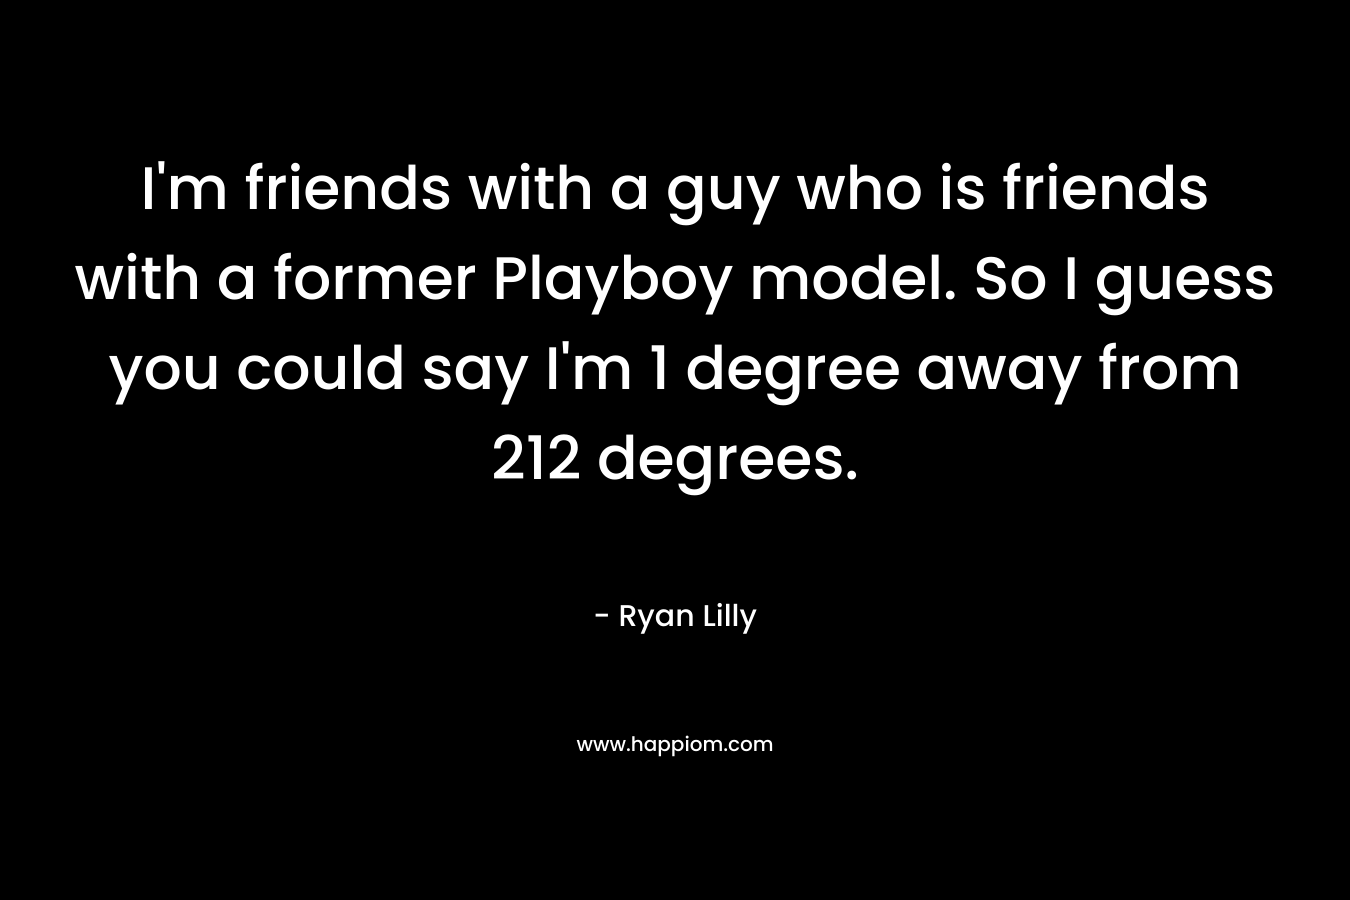 I’m friends with a guy who is friends with a former Playboy model. So I guess you could say I’m 1 degree away from 212 degrees. – Ryan Lilly